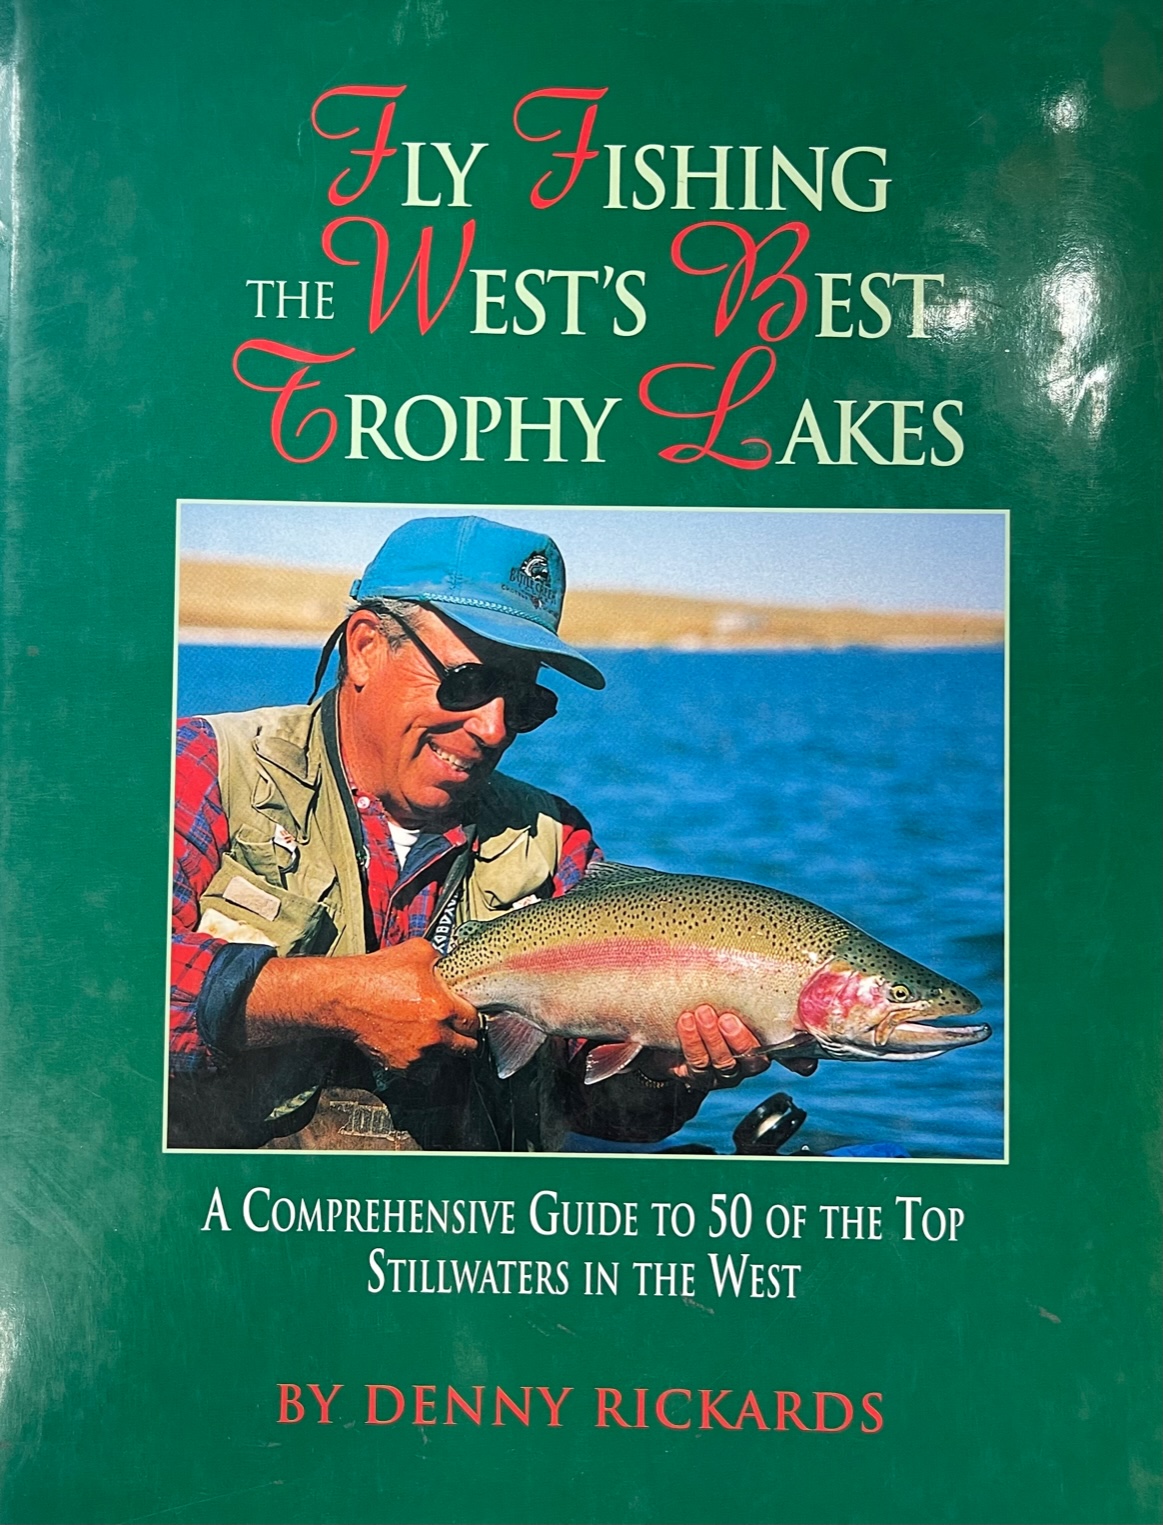 Fly Fishing The West's Best Trophy Lakes